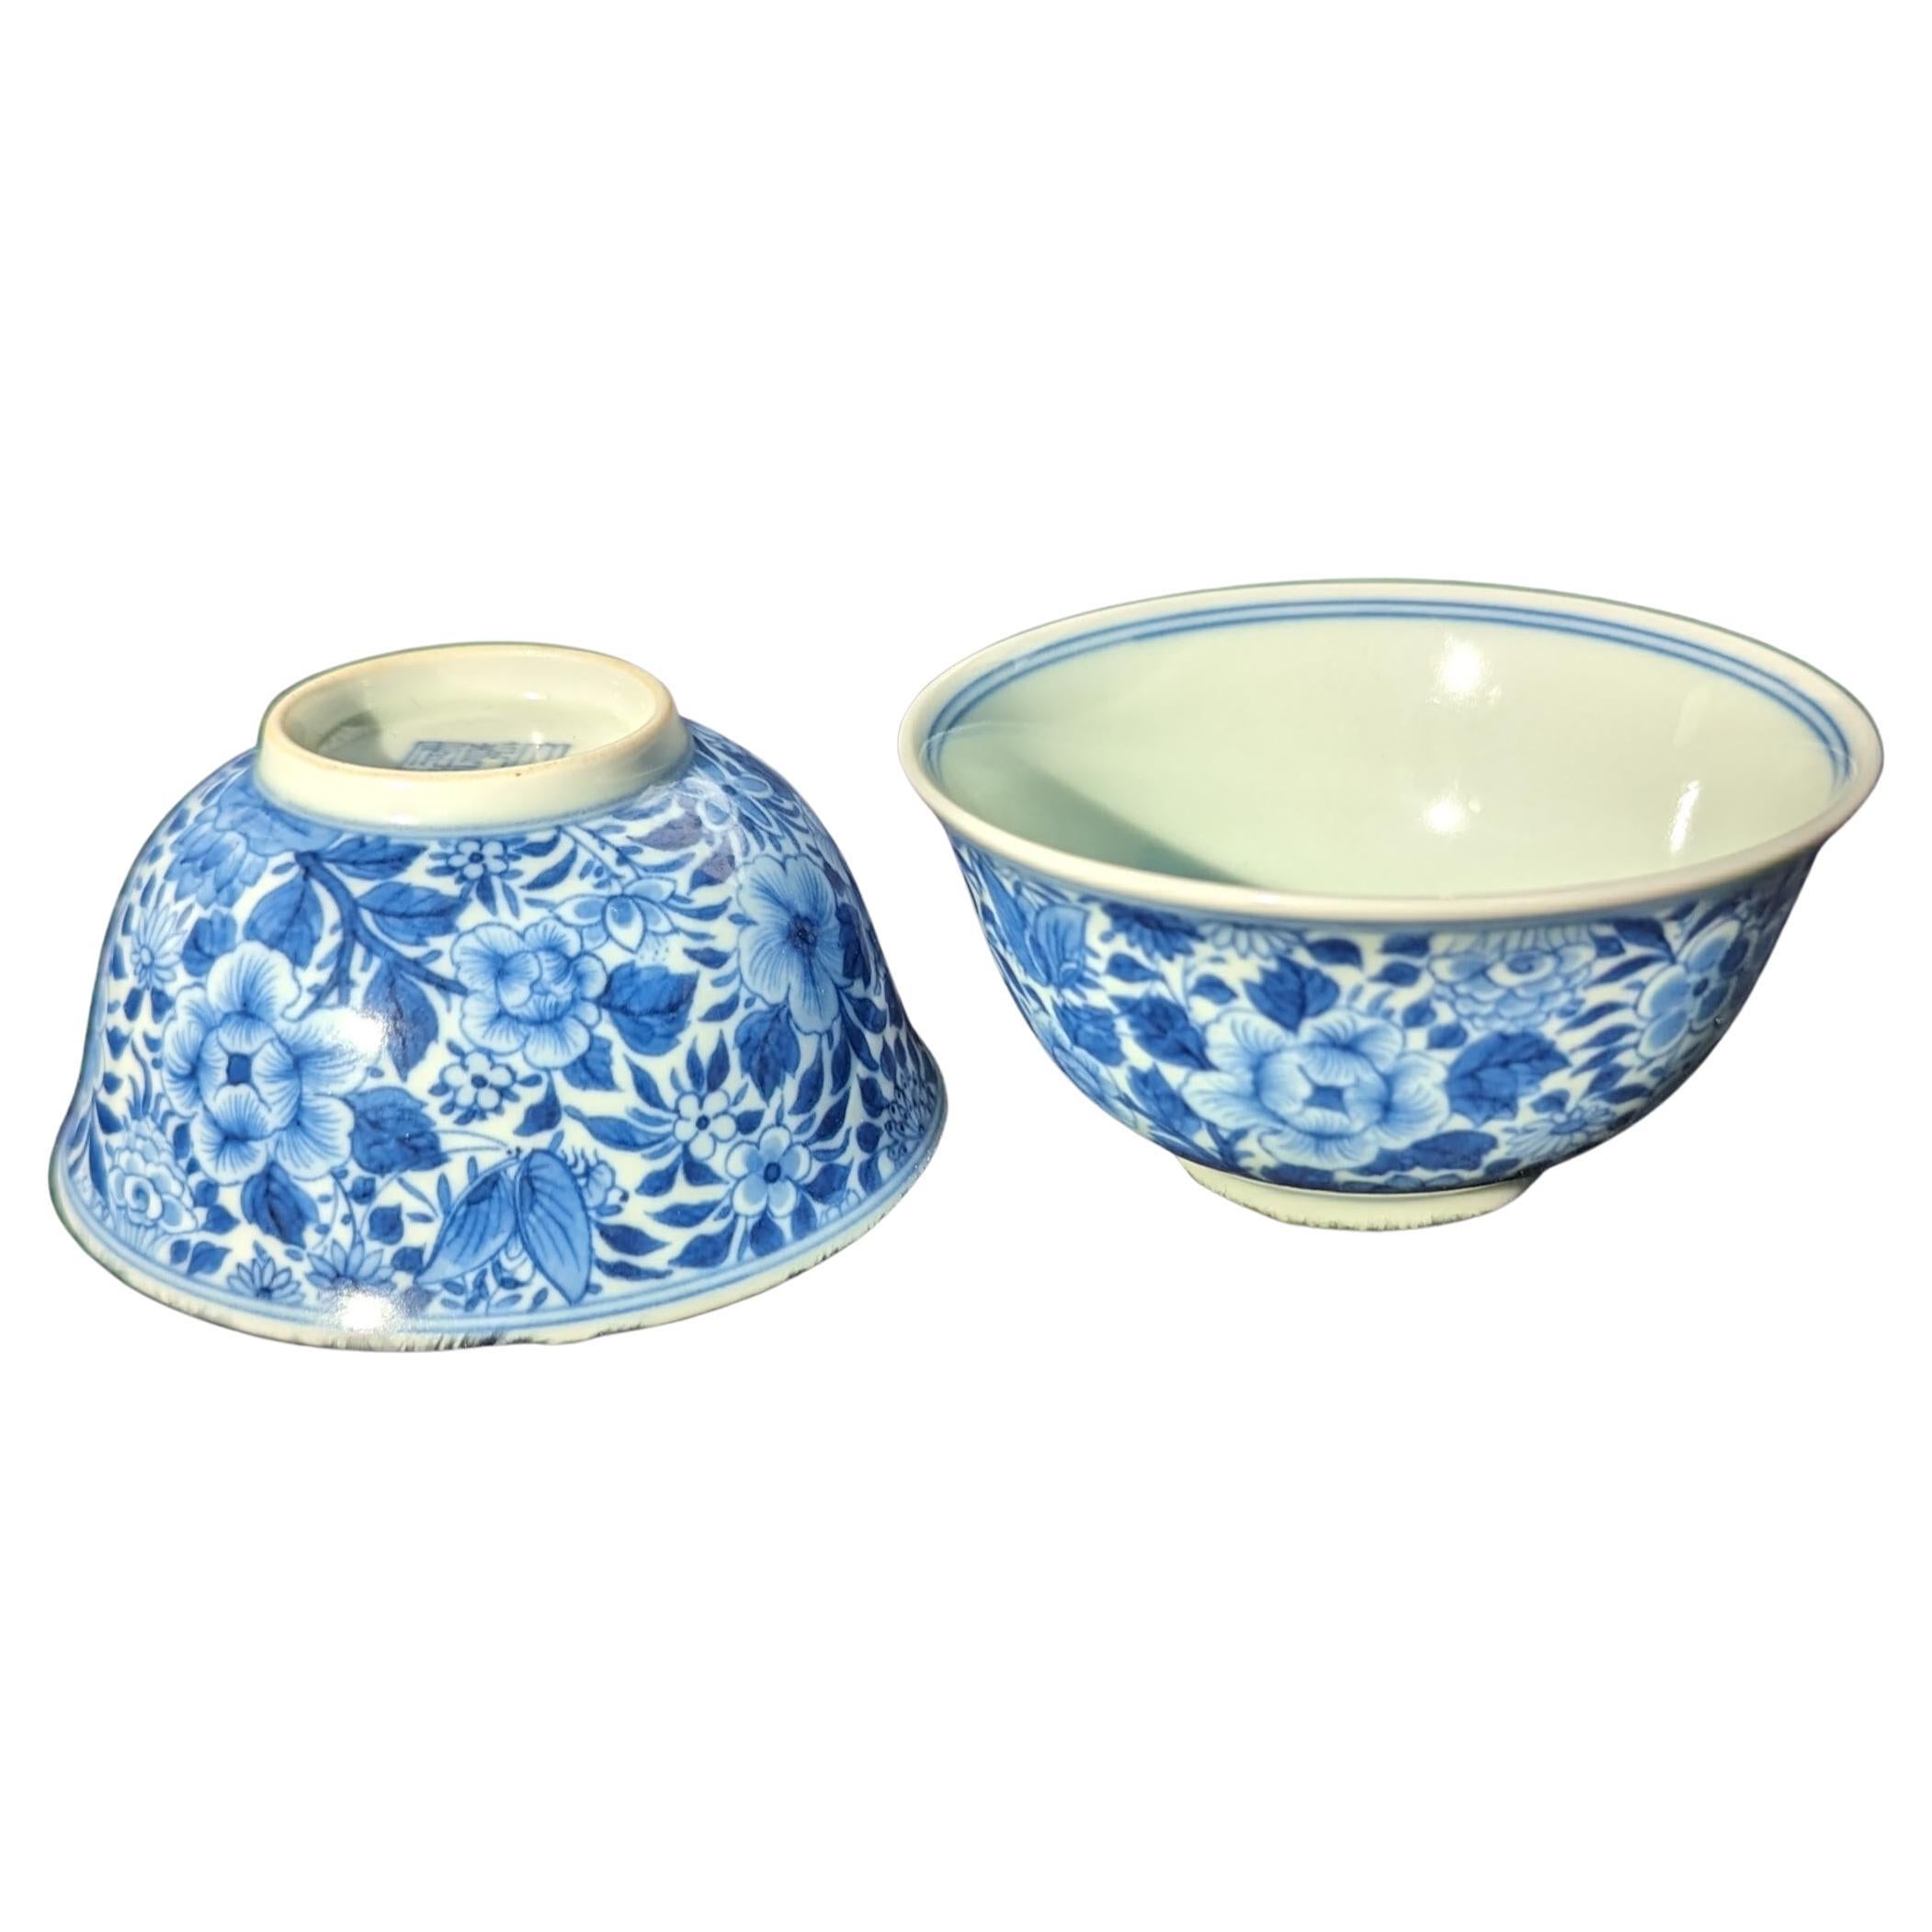 A pair of very fine Chinese porcelain small bowls, finely plotted hand decorated in underglaze blue and white in Qing mille fleur style, with apocryphal six character Qianlong mark within glazed footring in underglaze blue

This exquisite pair of